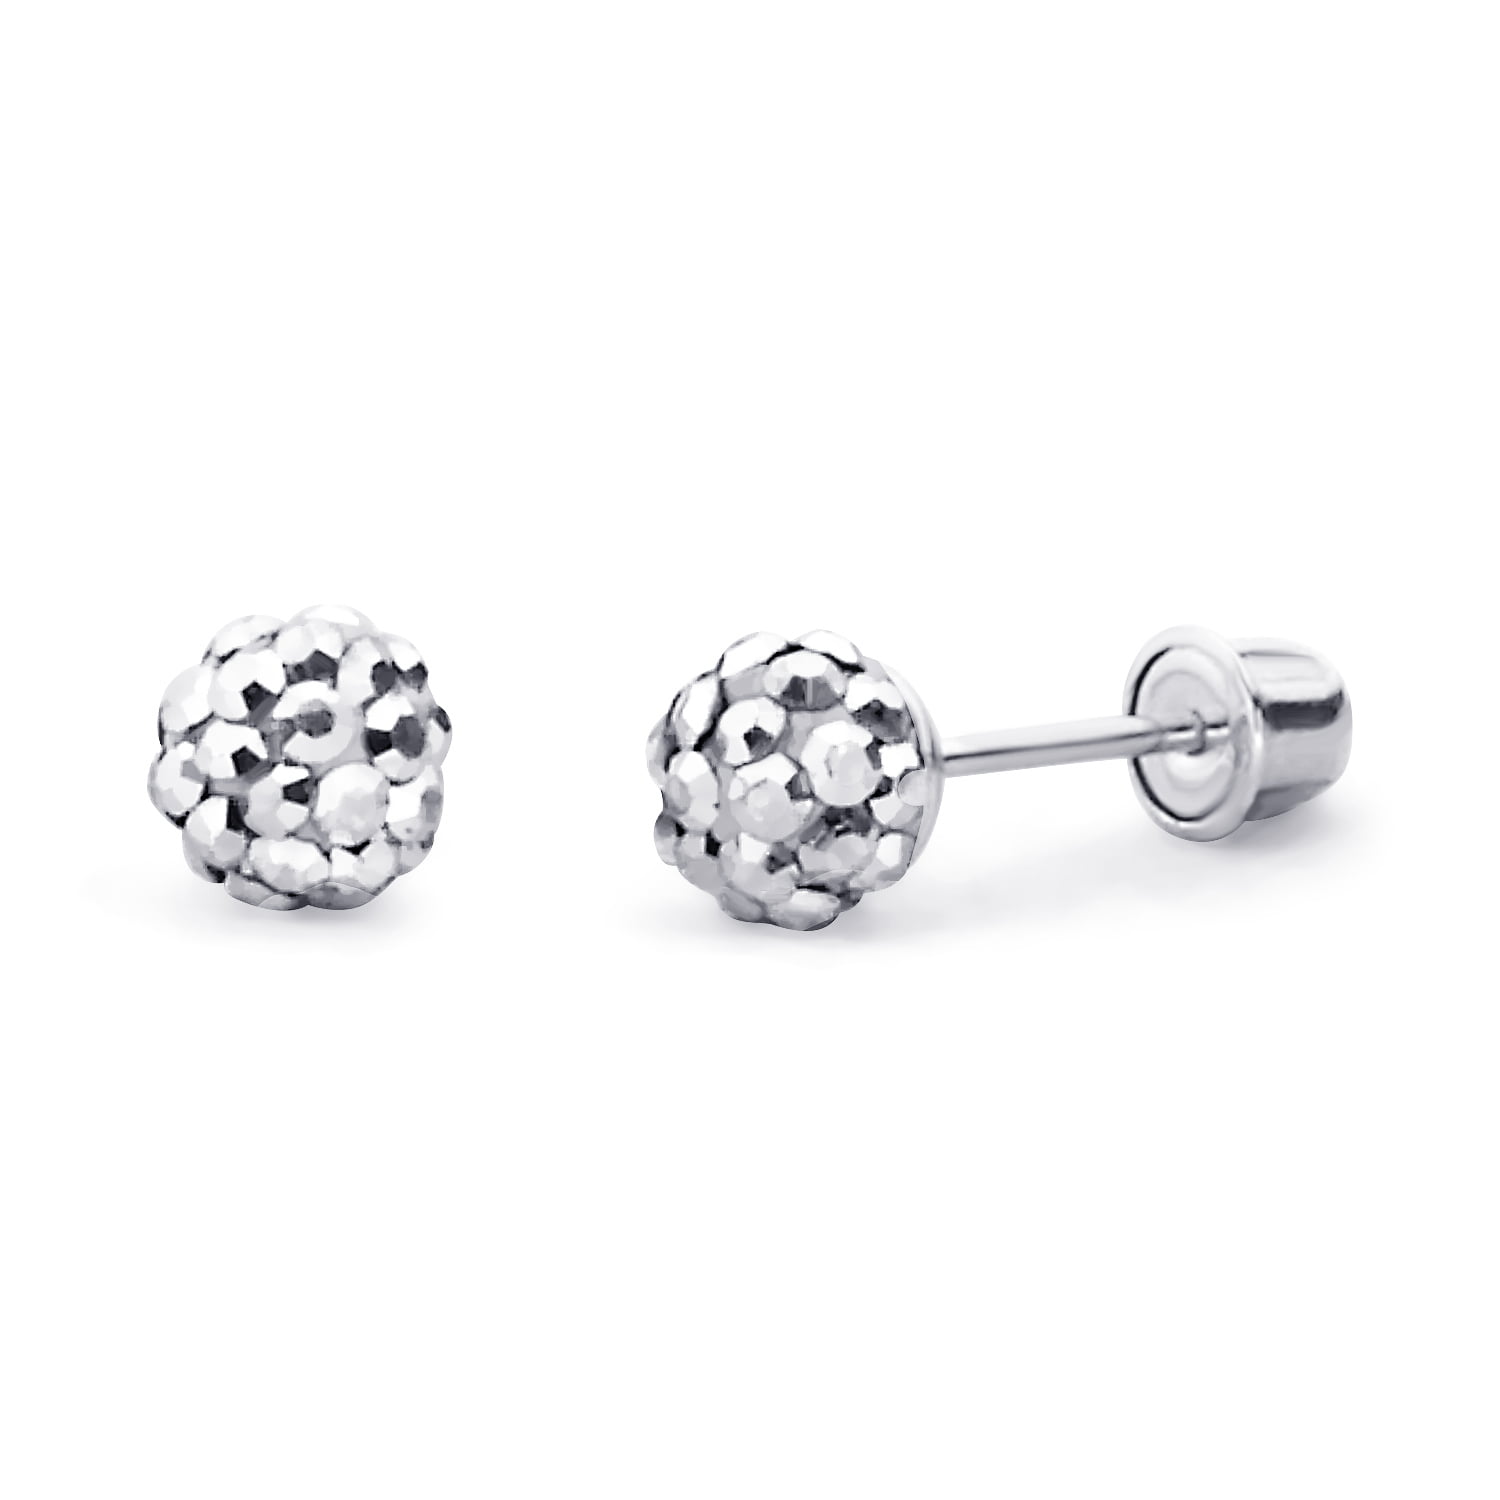 White Crystal Stylish Elegant Earrings Jewelry for Her Ct 0.9 Stainless Steel 